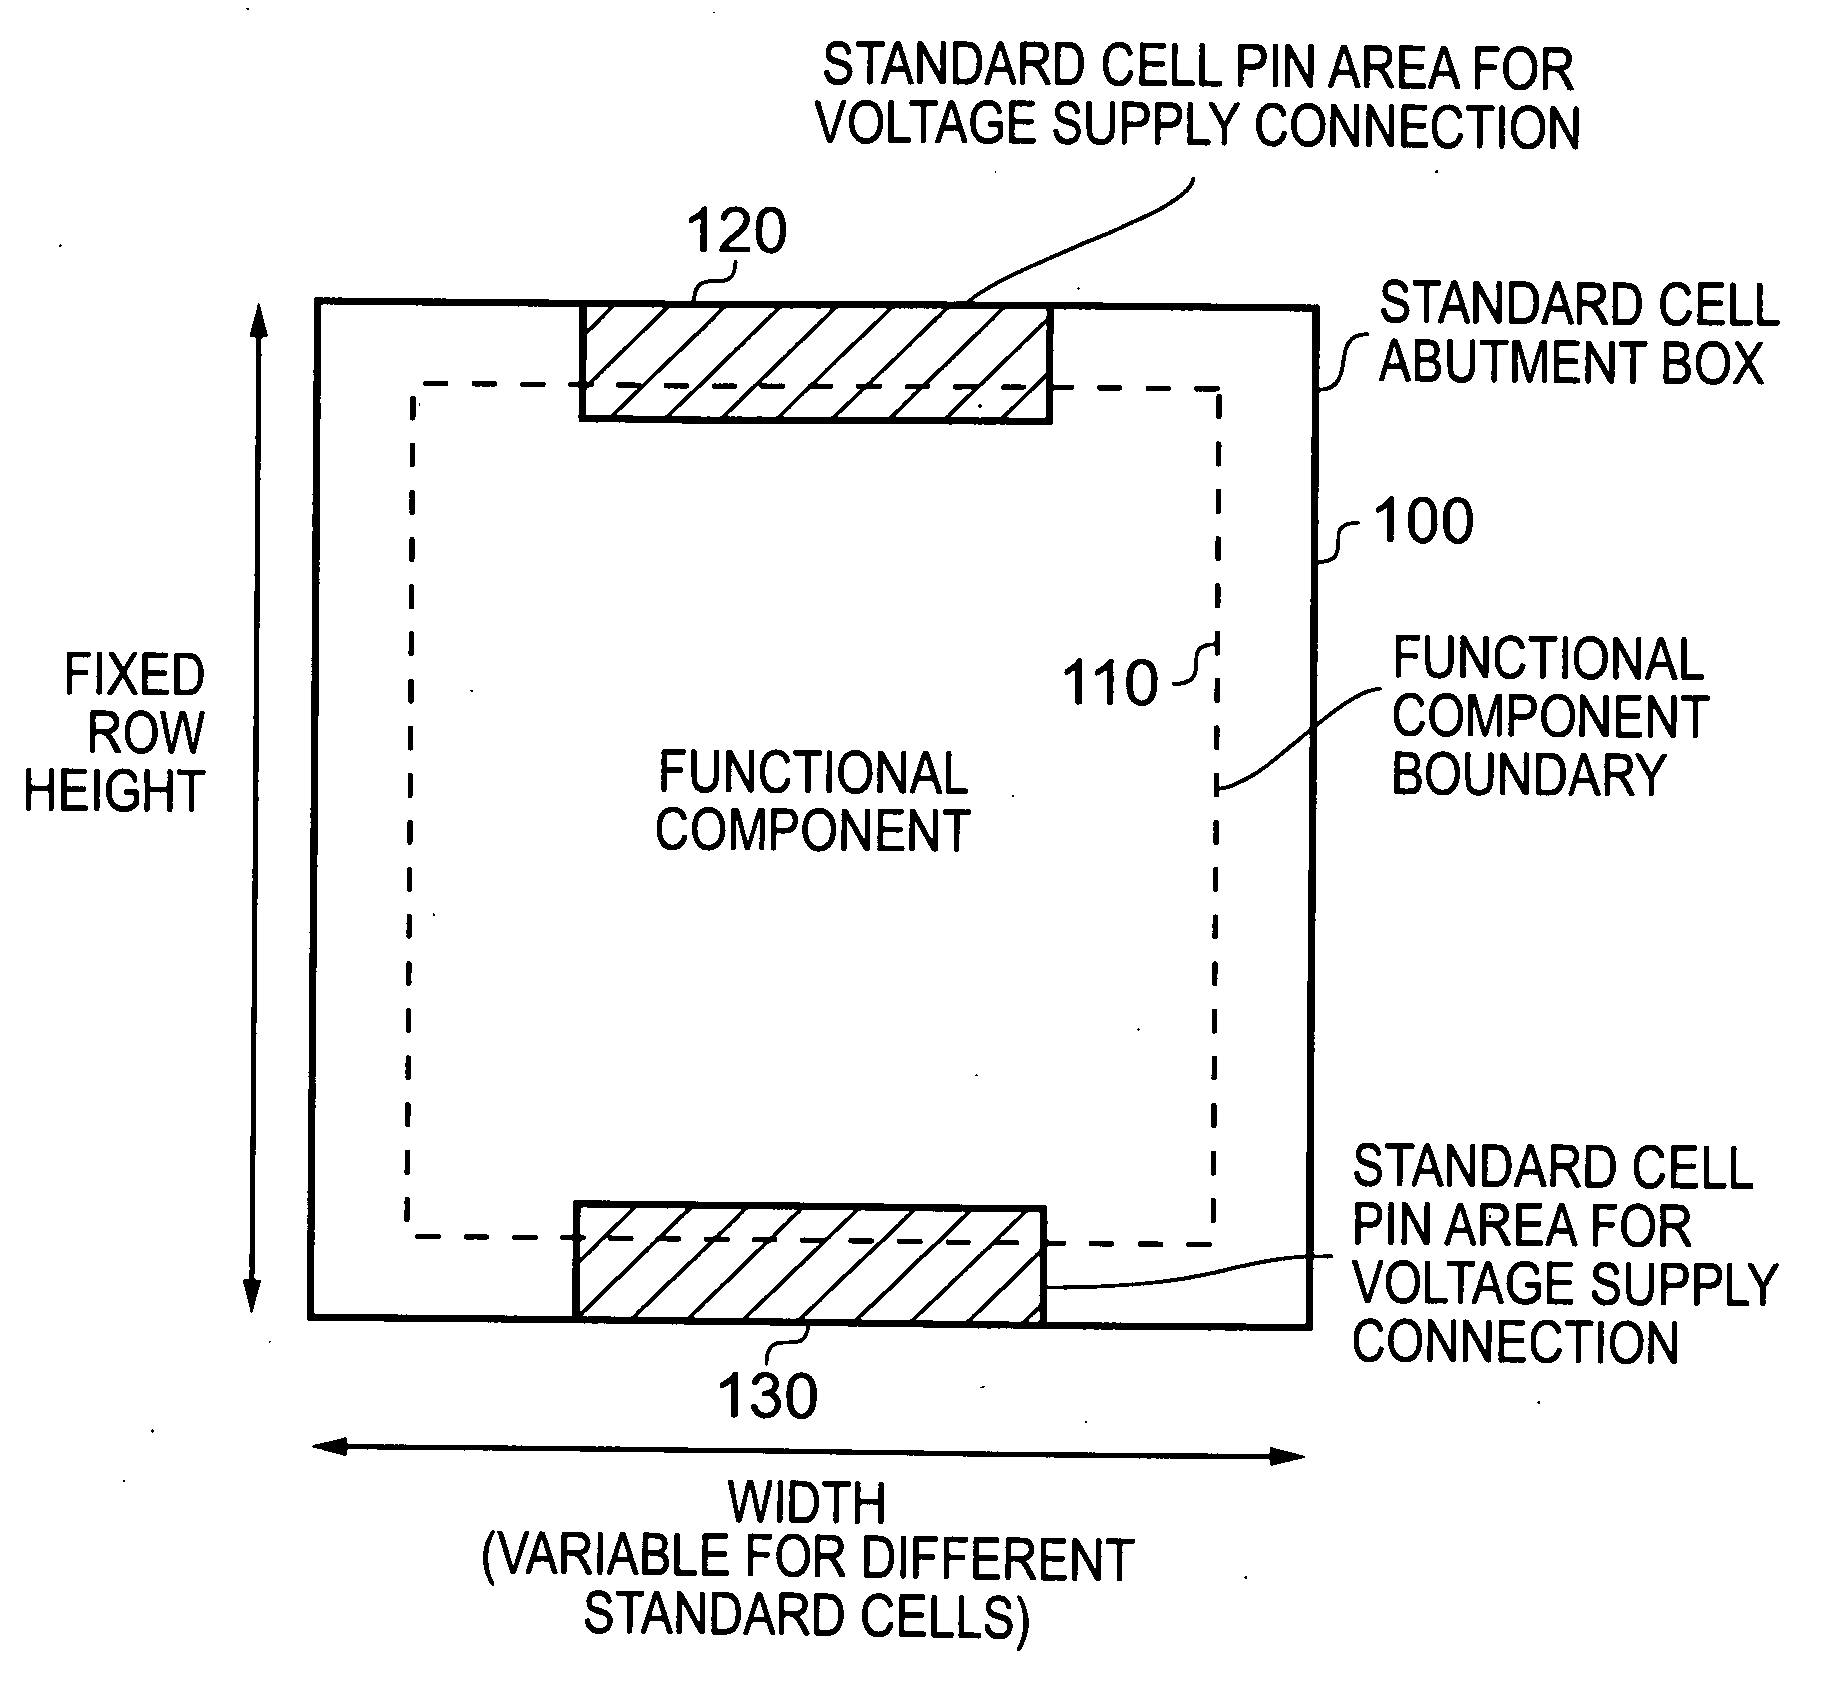 Integrated circuit, method of generating a layout of an integrated circuit using standard cells, and a standard cell library providing such standard cells